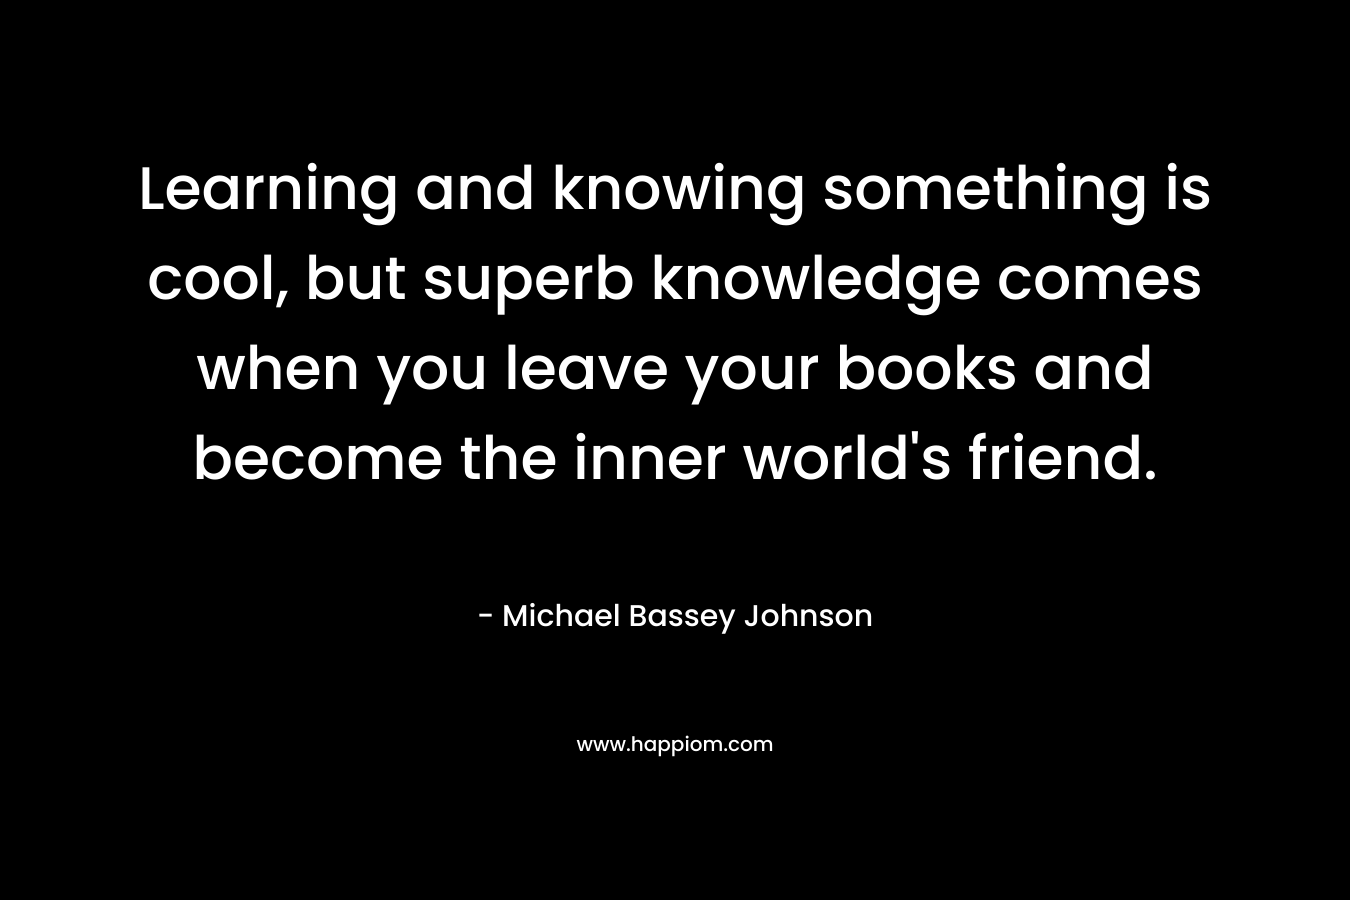 Learning and knowing something is cool, but superb knowledge comes when you leave your books and become the inner world’s friend. – Michael Bassey Johnson